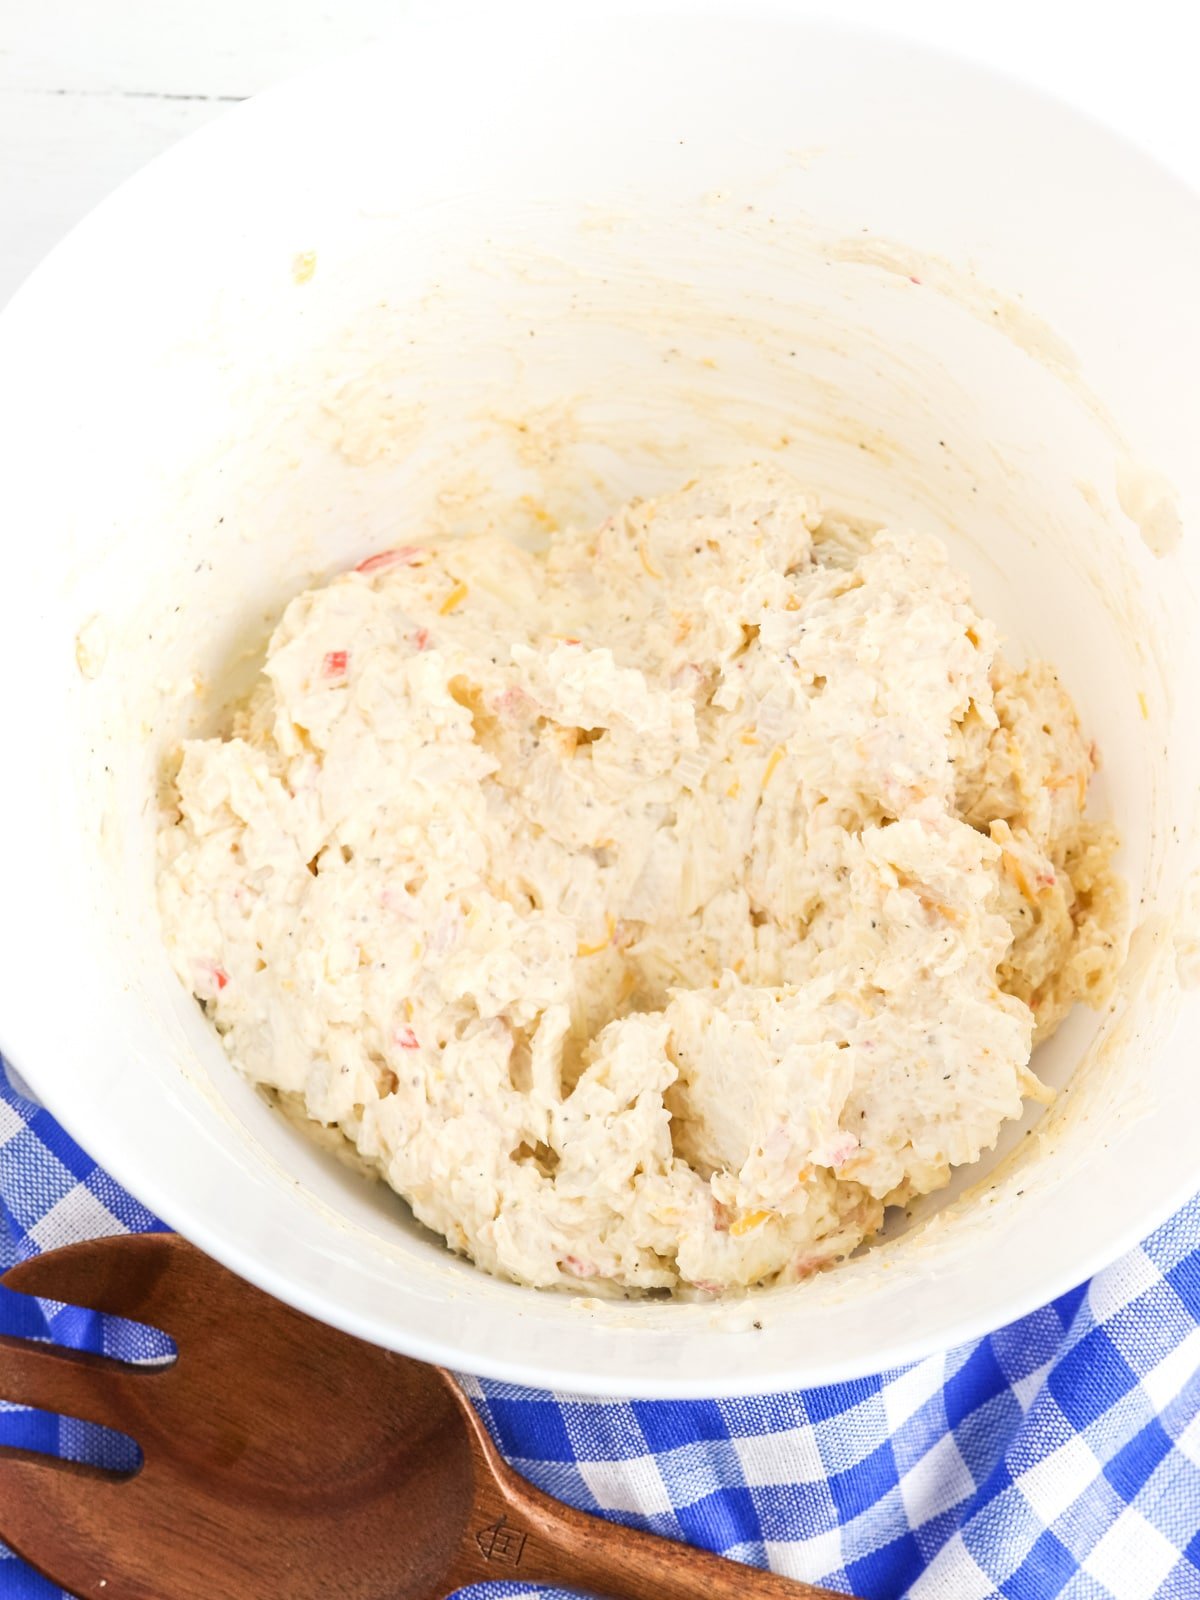 Stir Cold Crab Dip until well combined